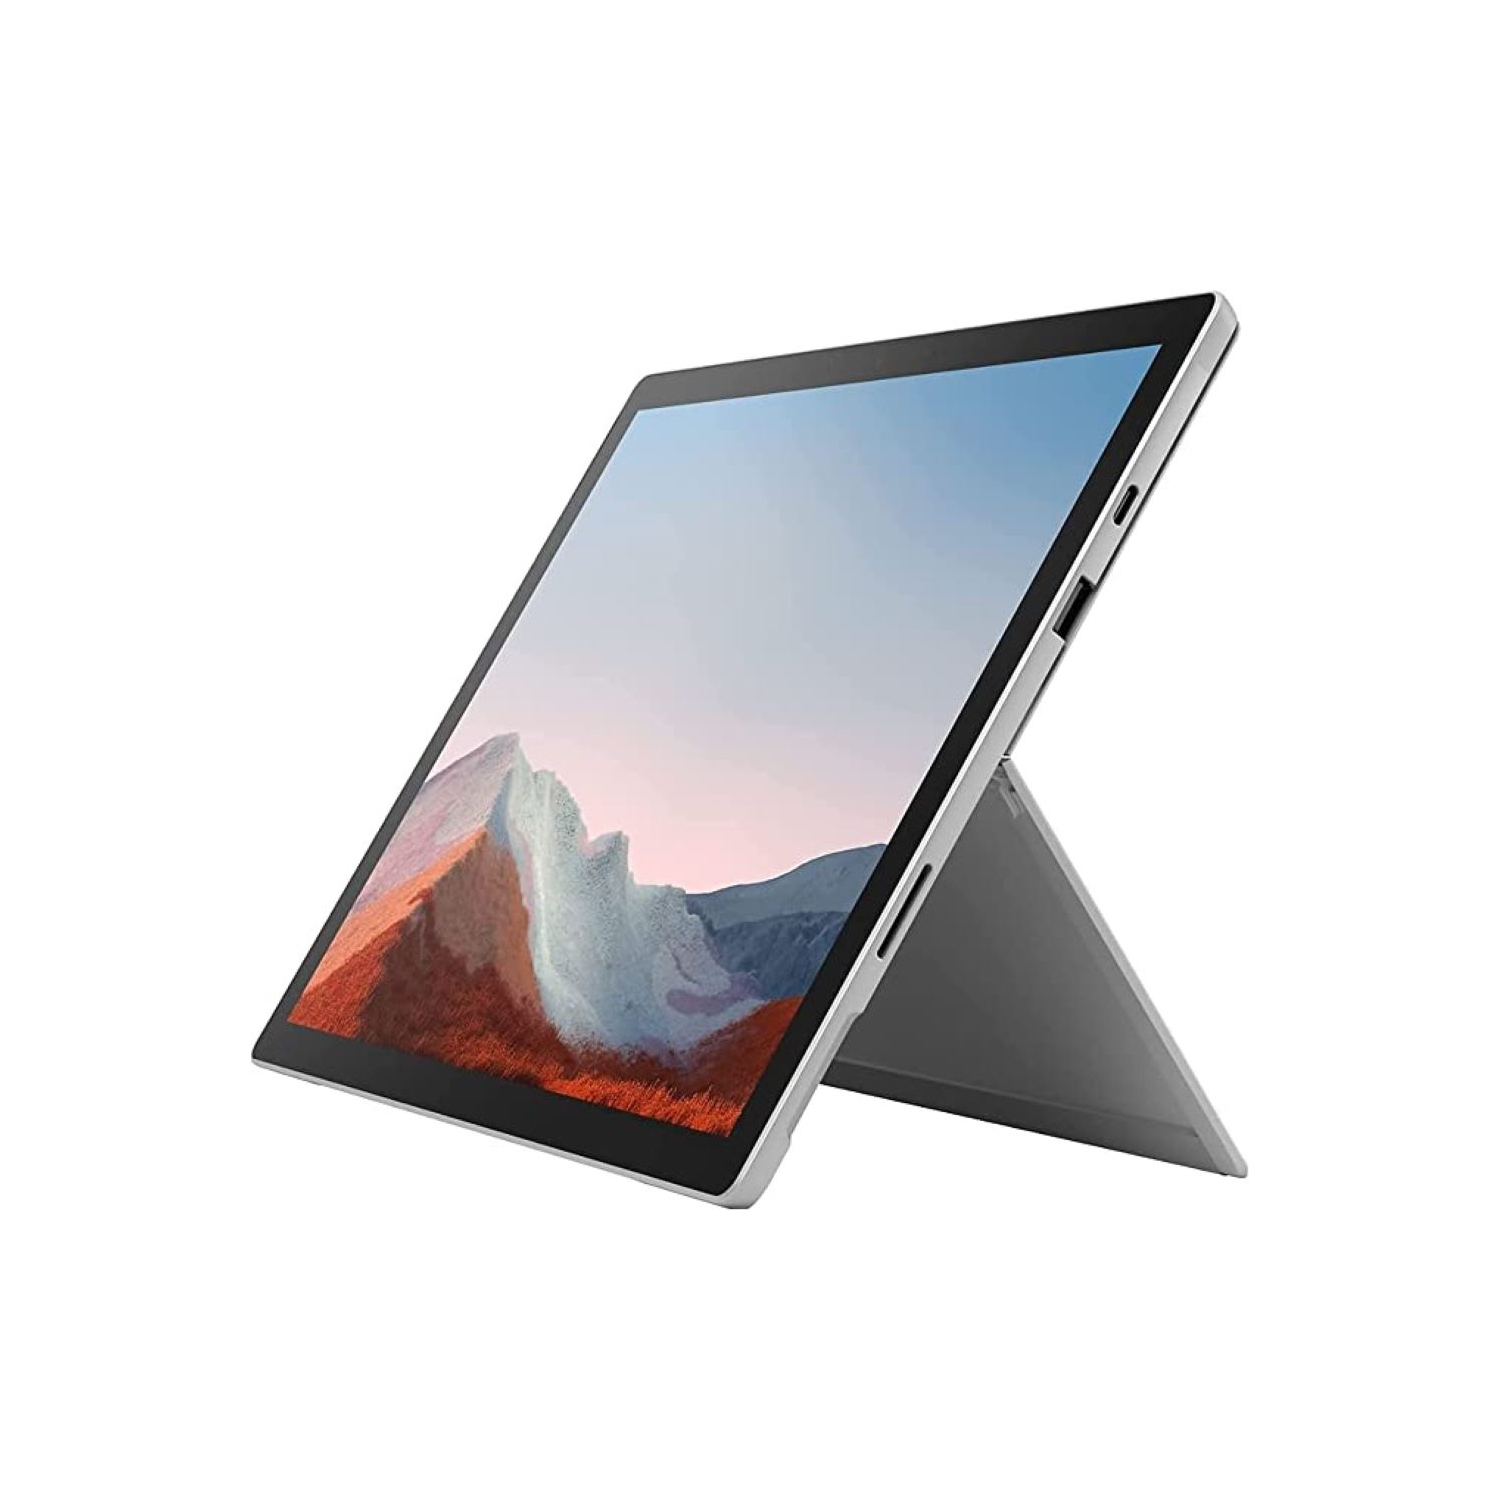 Refurbished (Excellent) - Microsoft Surface PRO 7 (1866) Tablet - 12.3" Touchscreen - Intel Core i5-1035G4, 1.1GHz, 16GB, 256GB SSD French Keyboard Windows 10 Pro.